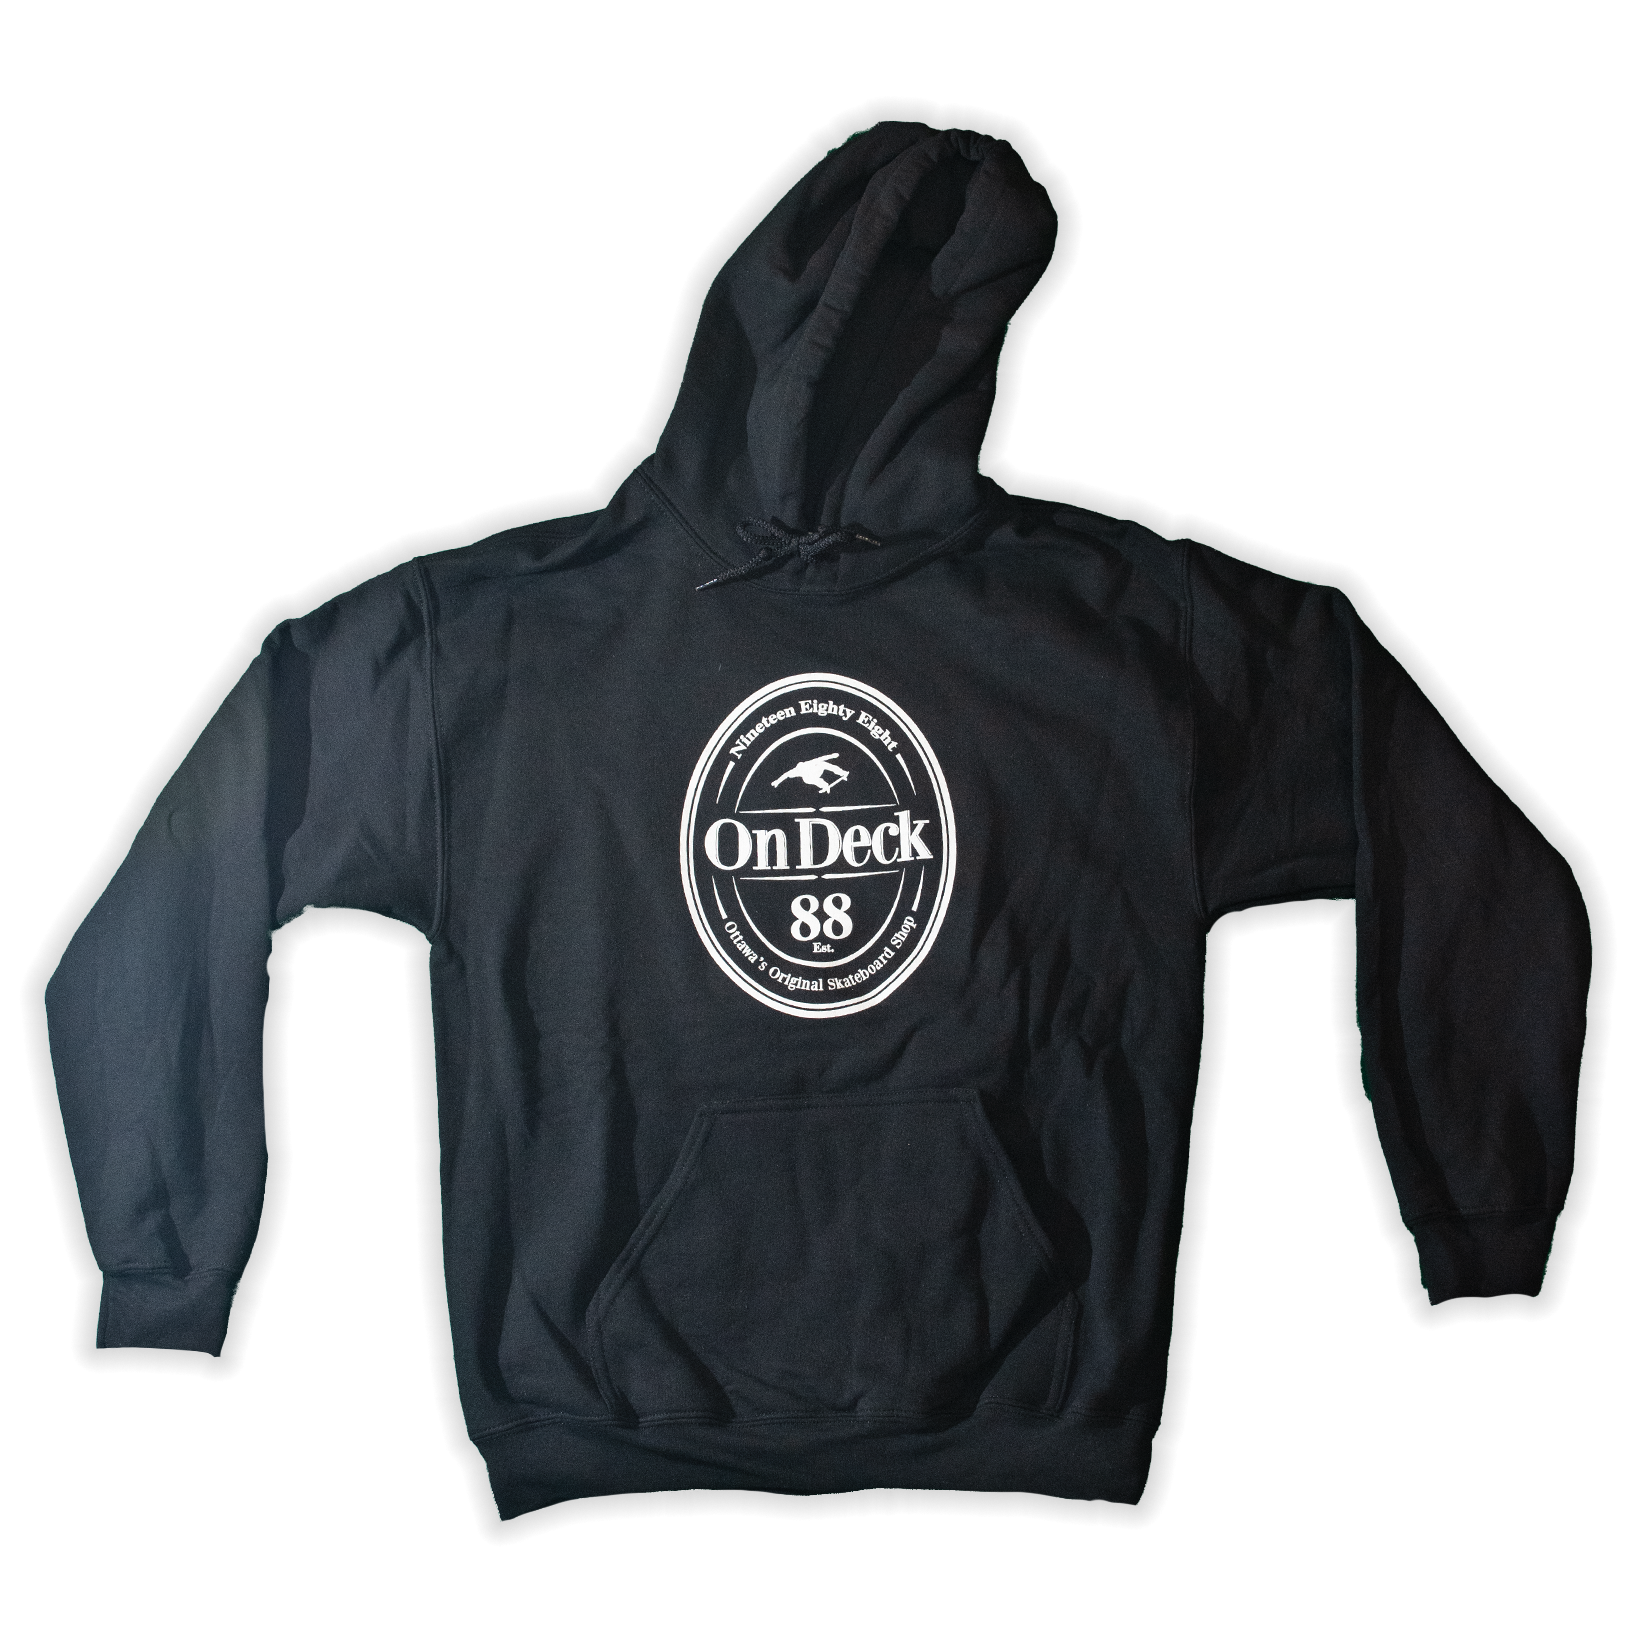 On Deck Oval Patch Hoodie